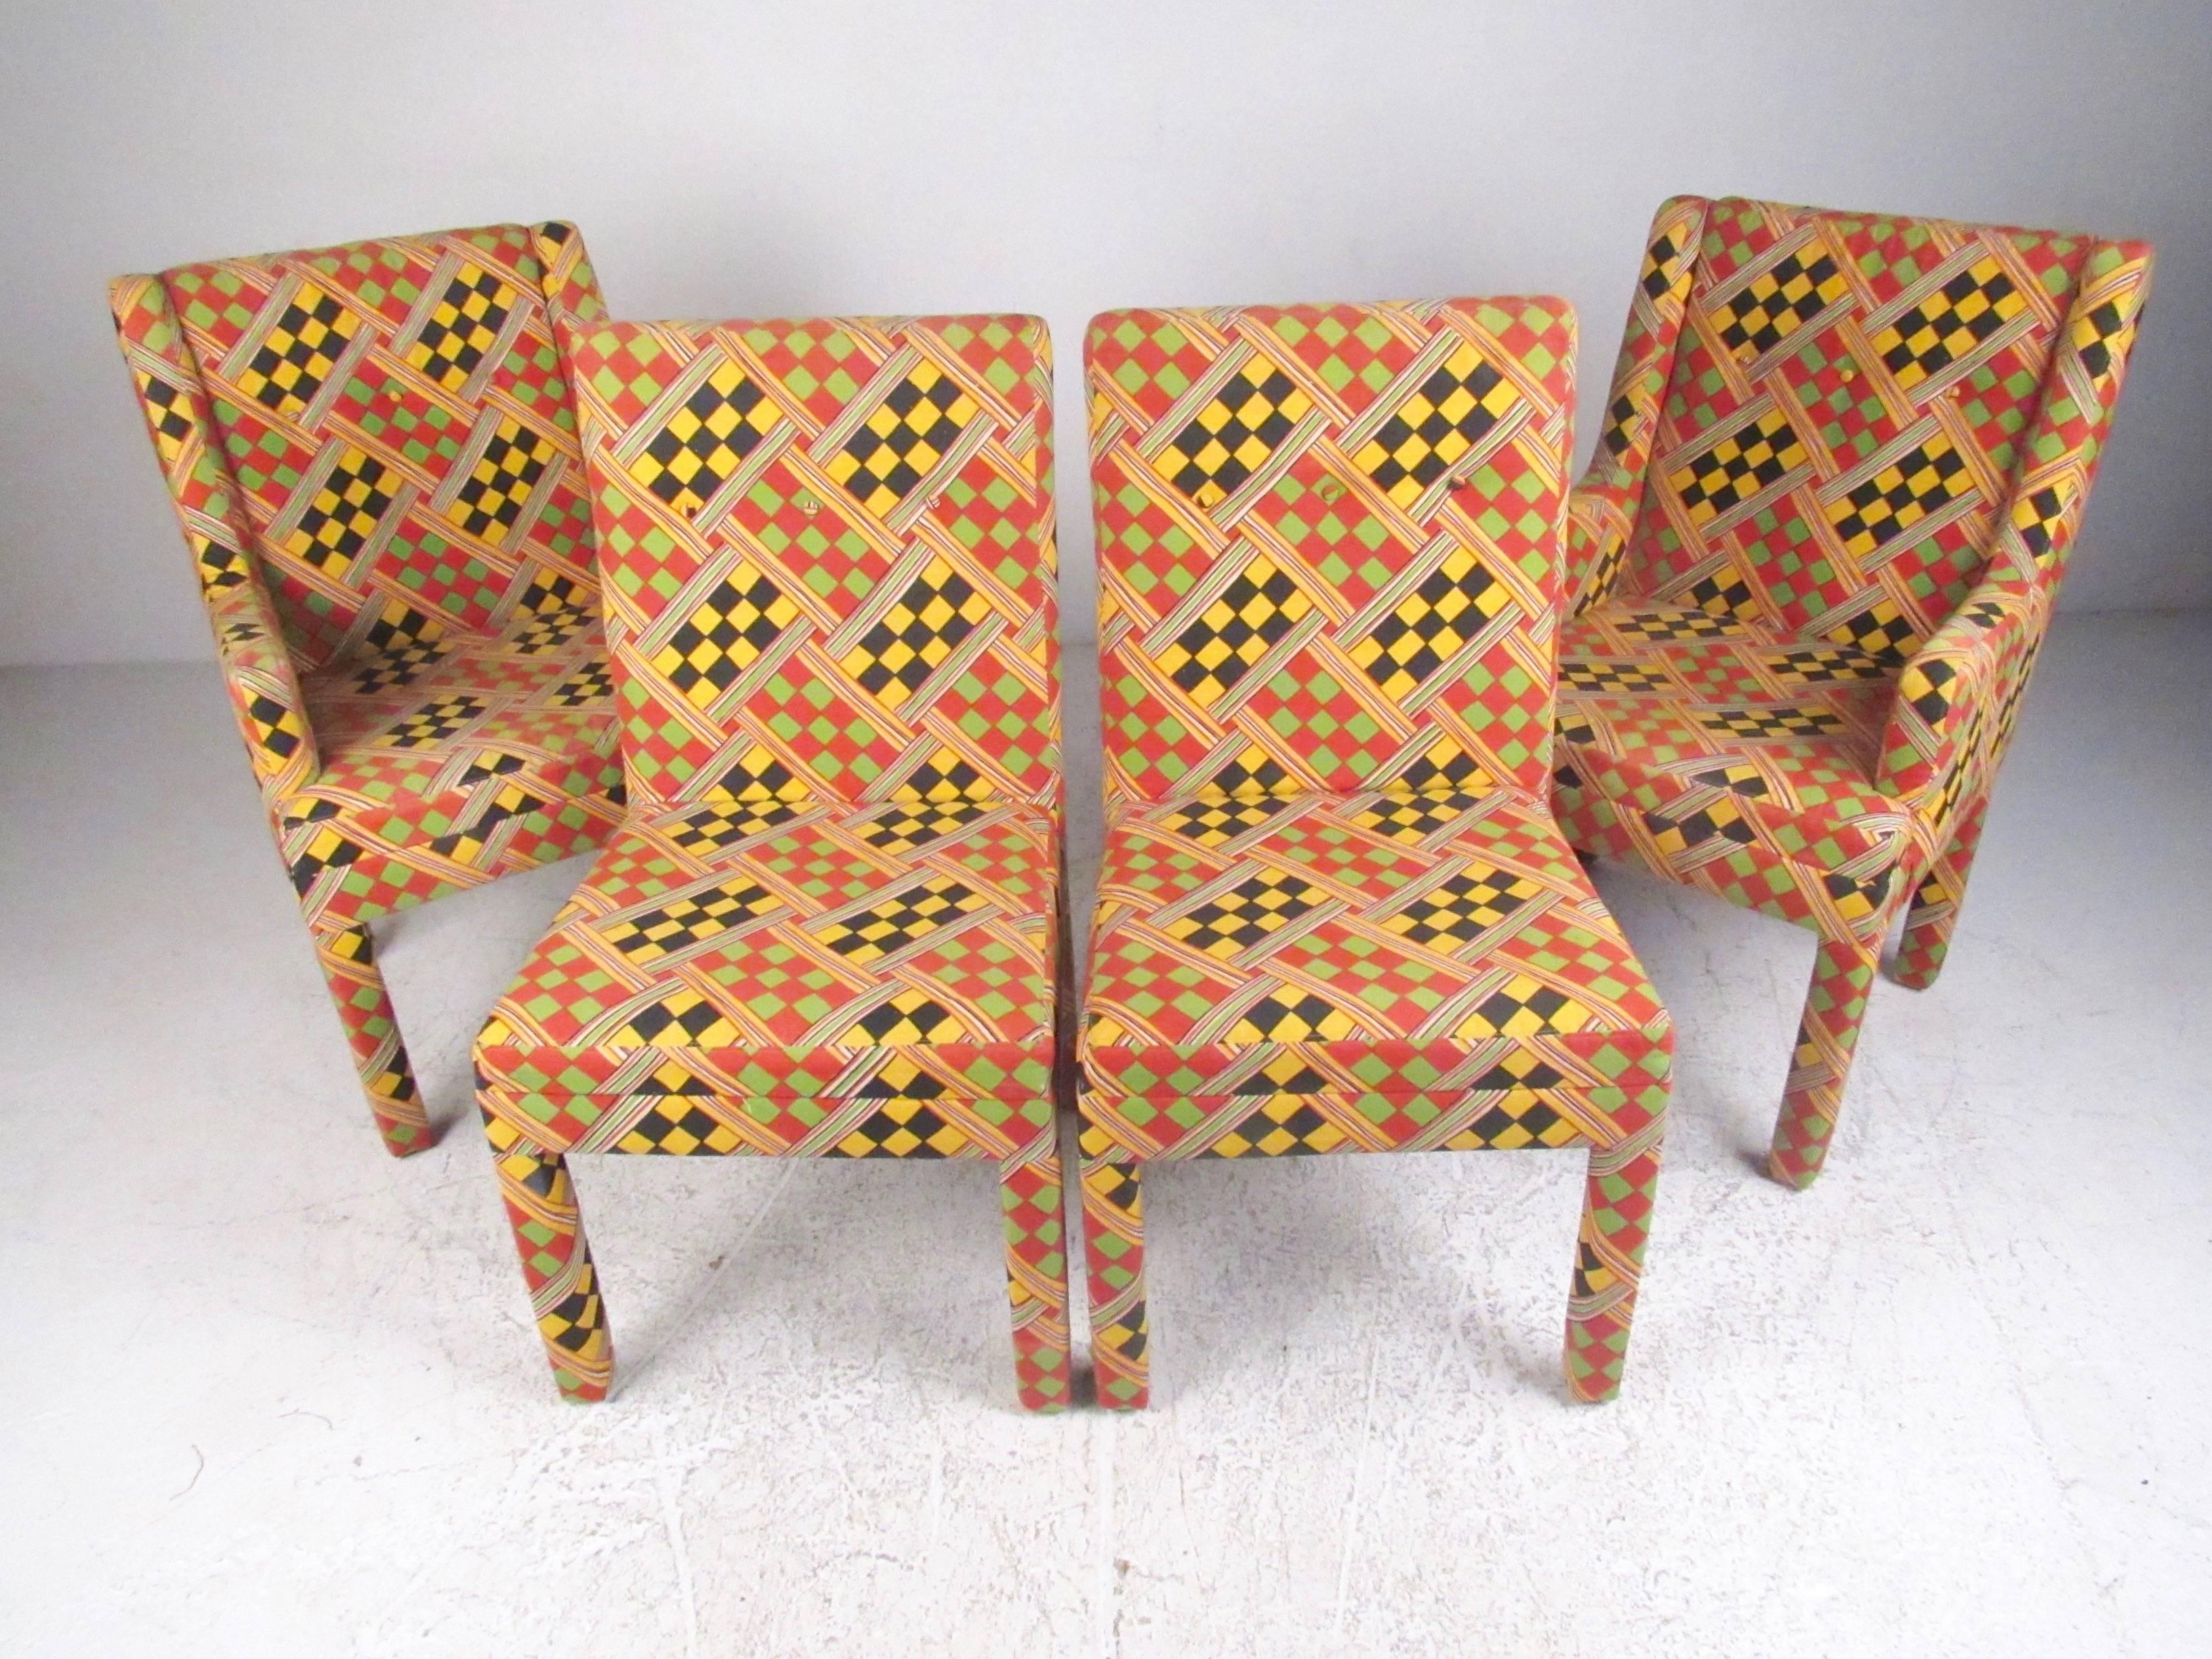 This set of four stylish vintage modern dining chairs features bright multi-patterned upholstery, sturdy construction, and unique Parsons style design. Comfortable matching set includes two arm chairs (24 inches wide) and two side chairs (20 inches